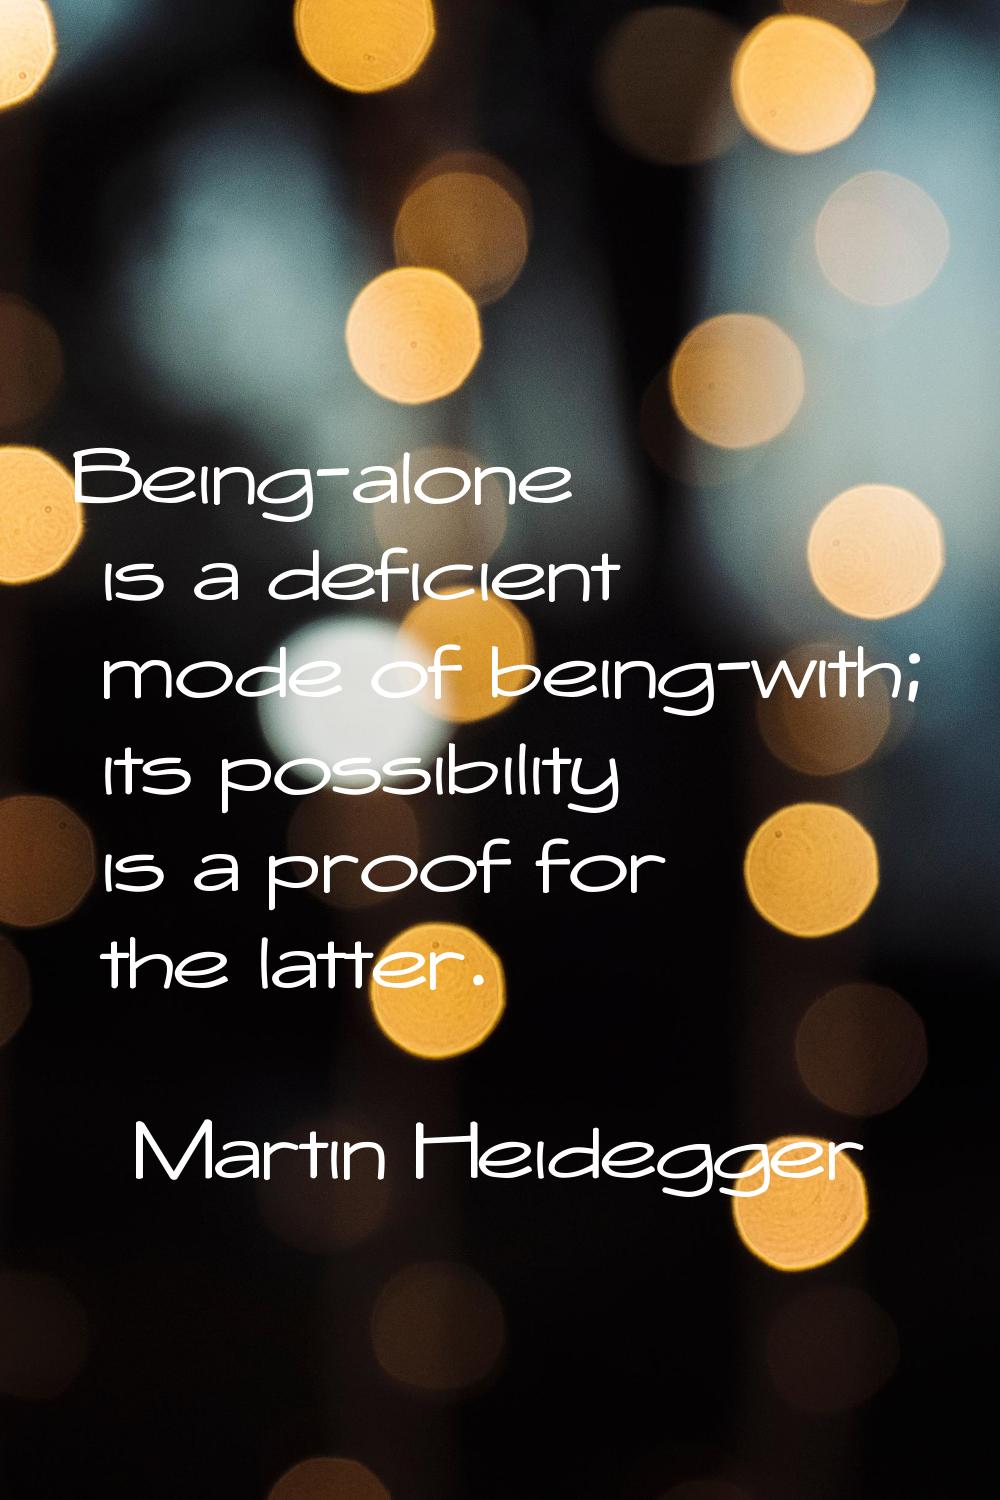 Being-alone is a deficient mode of being-with; its possibility is a proof for the latter.